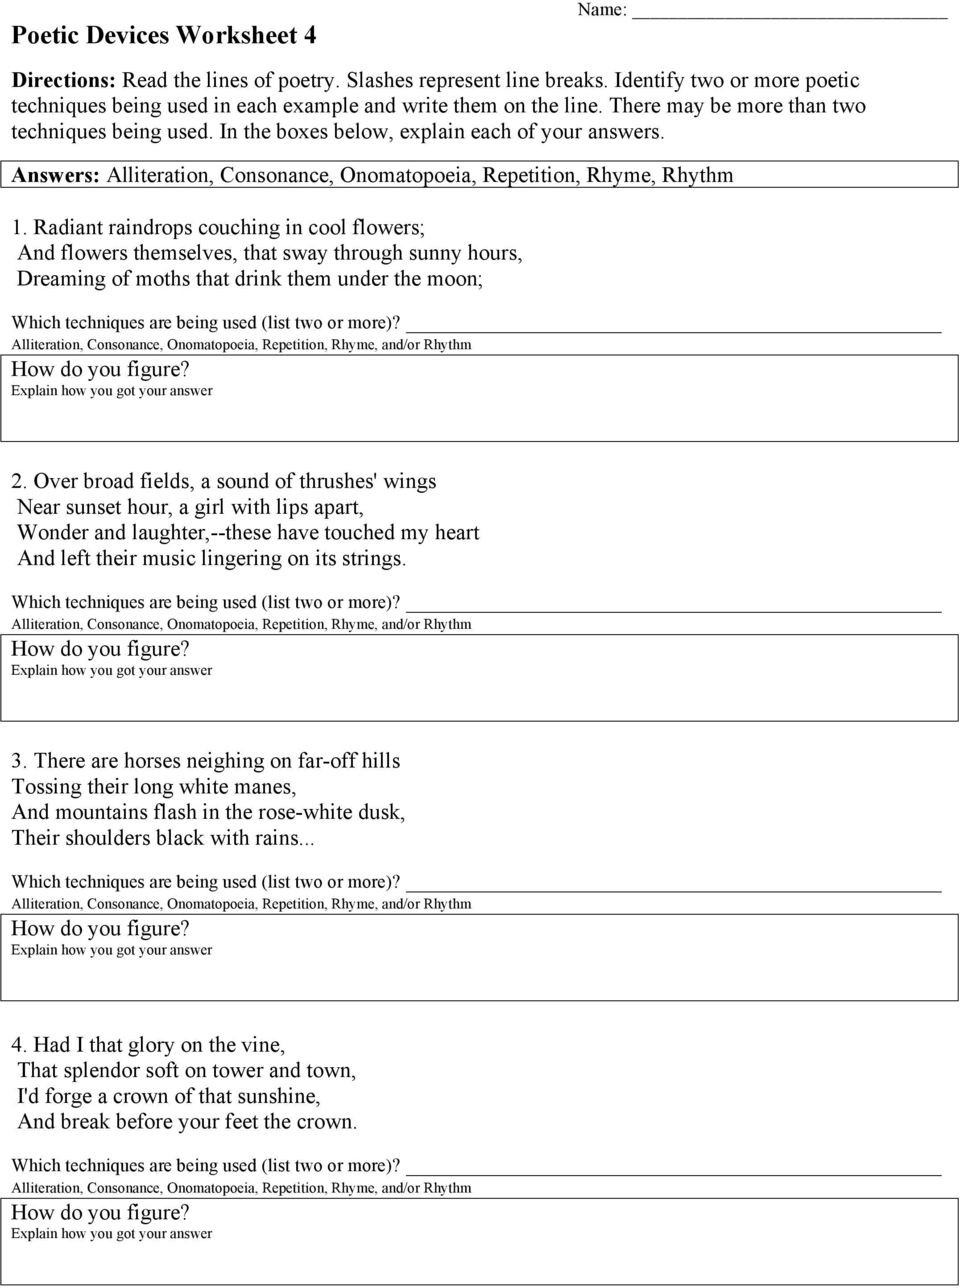 Sound Devices In Poetry Worksheet Poetic Devices Worksheet 4 Pdf Free Download